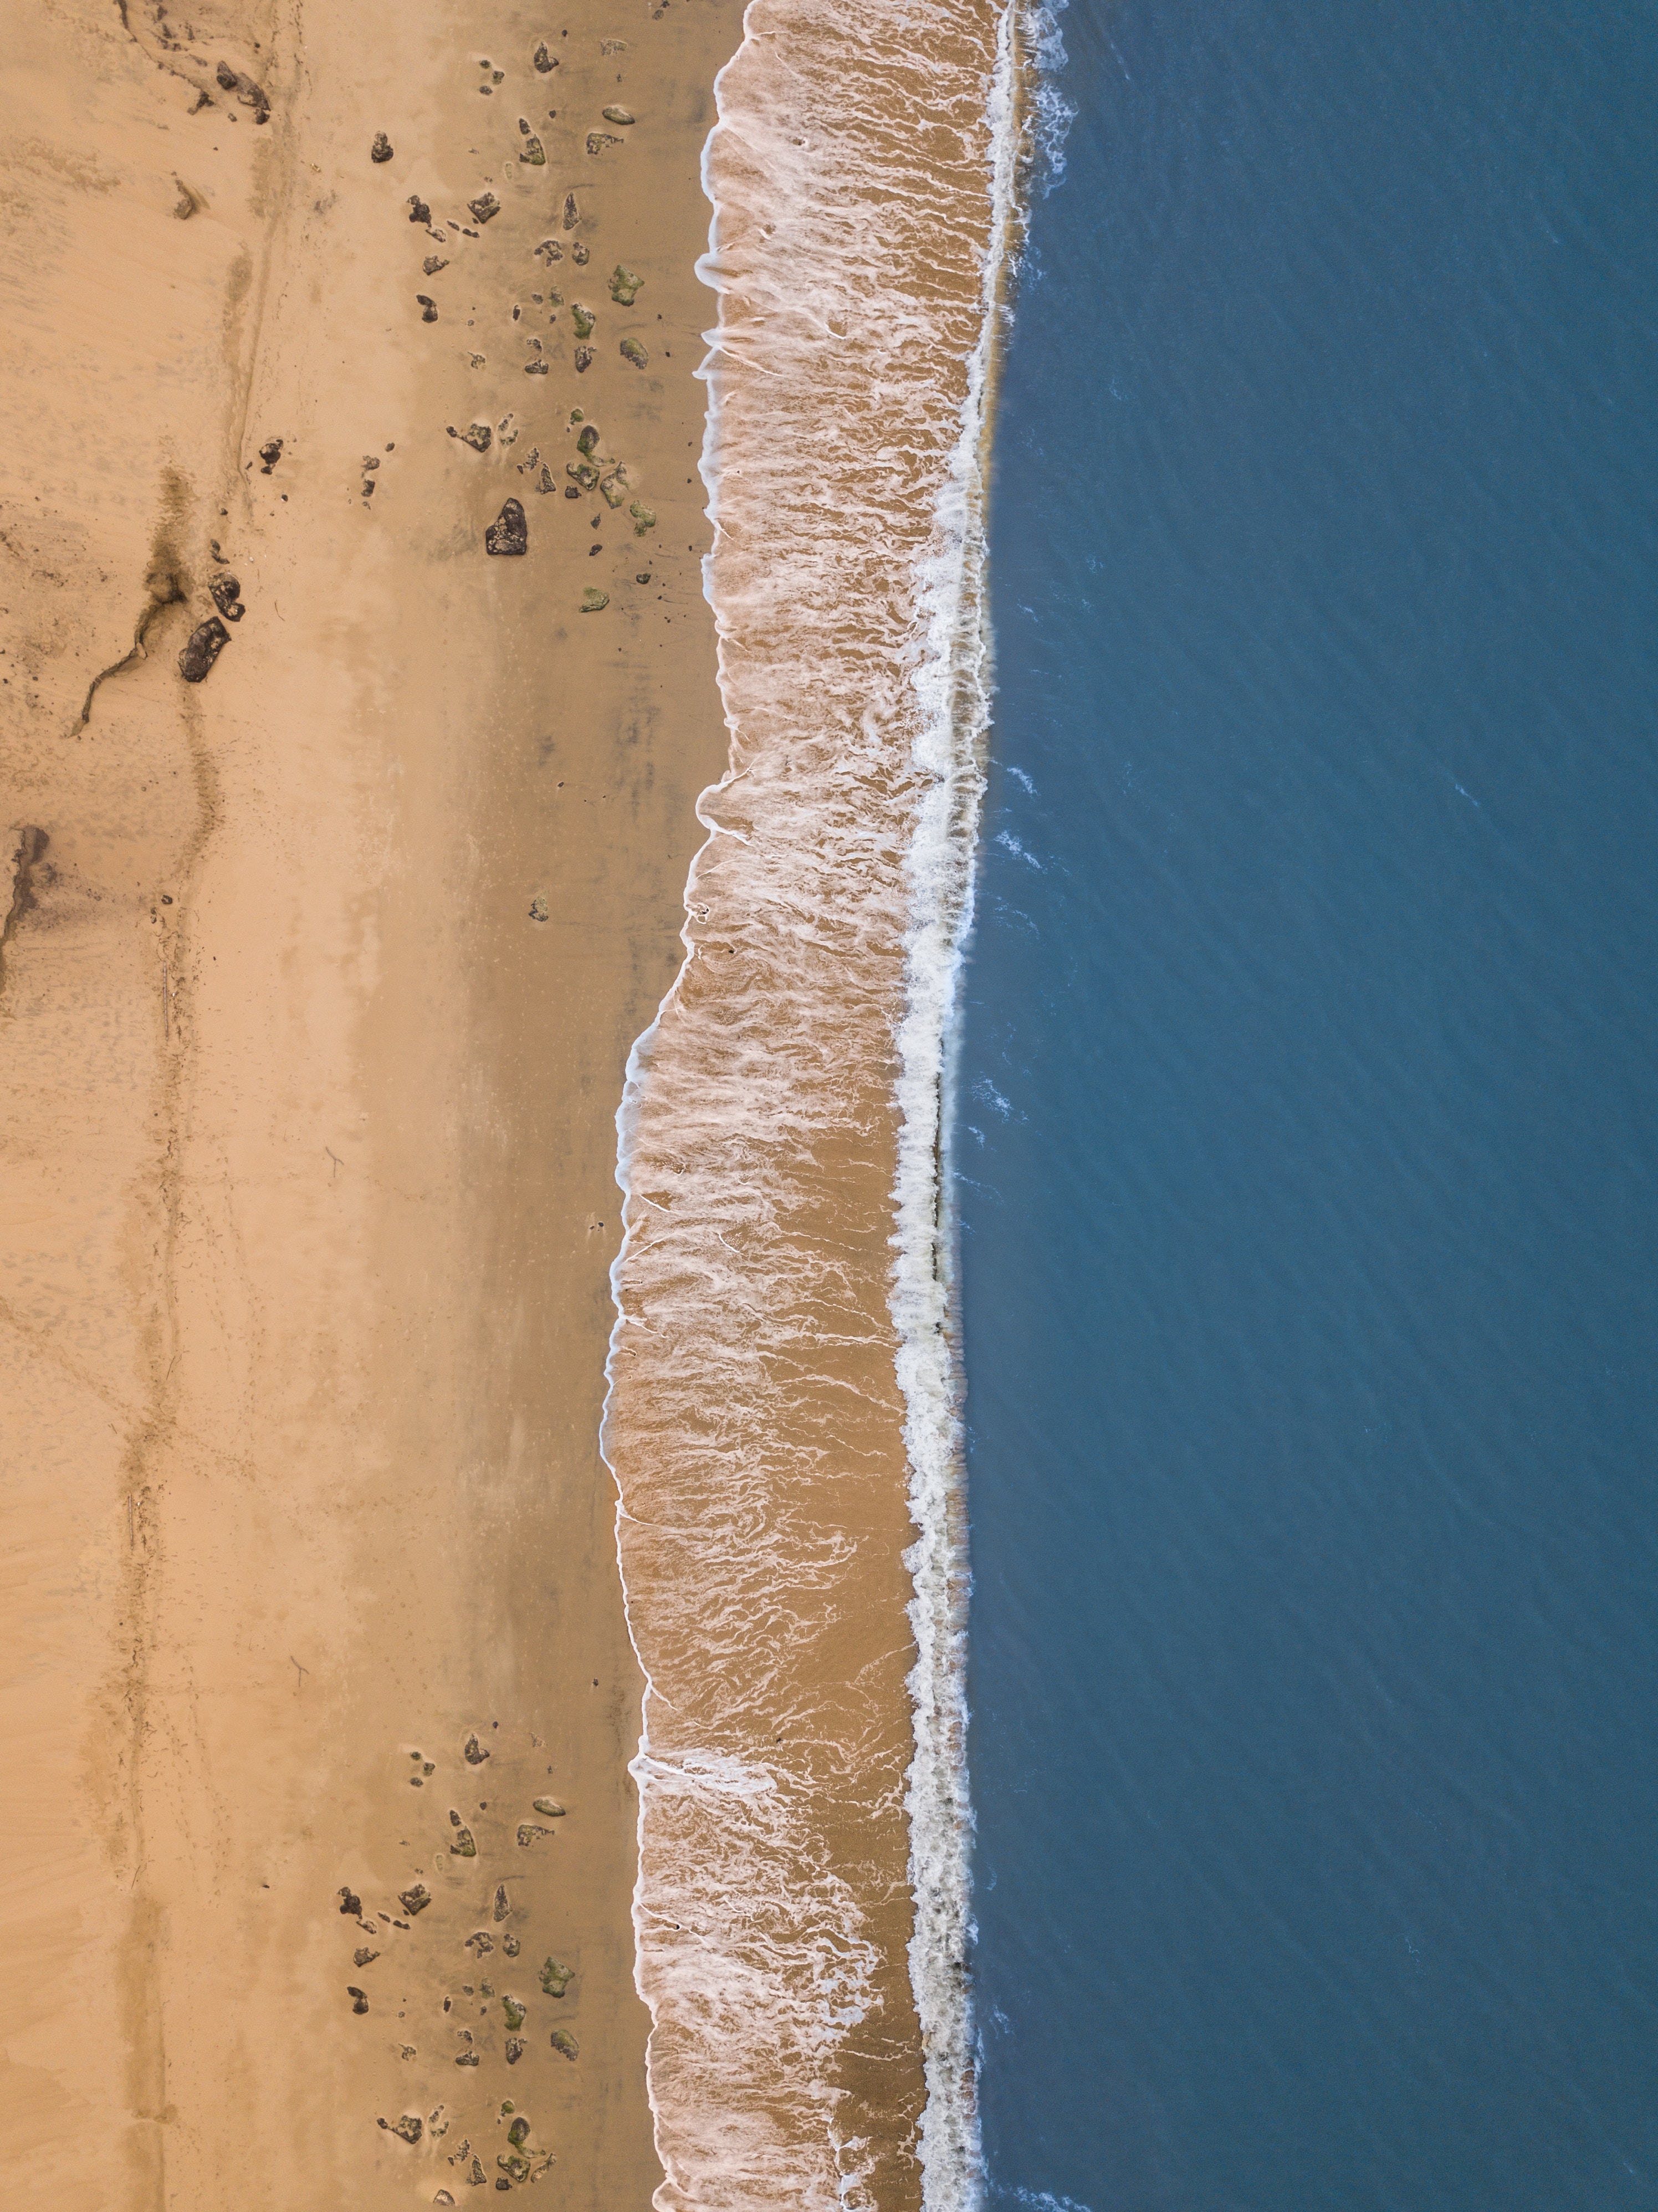 nature, sea, beach, sand, view from above, surf, wave